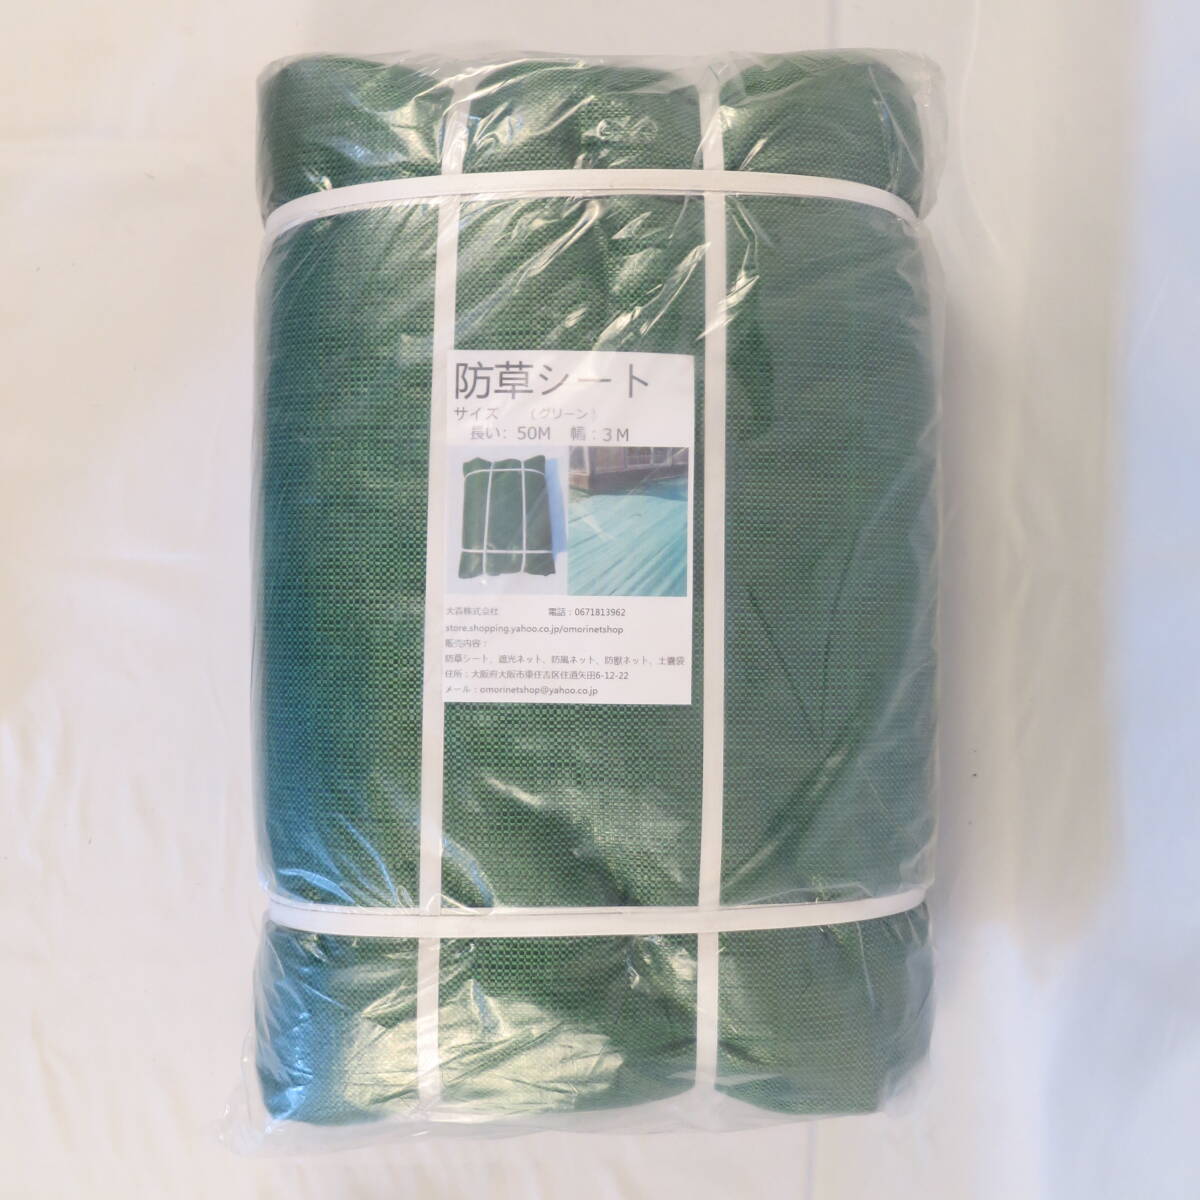  weed proofing seat 3m×50m green color powerful endurance nationwide free shipping stock great number 